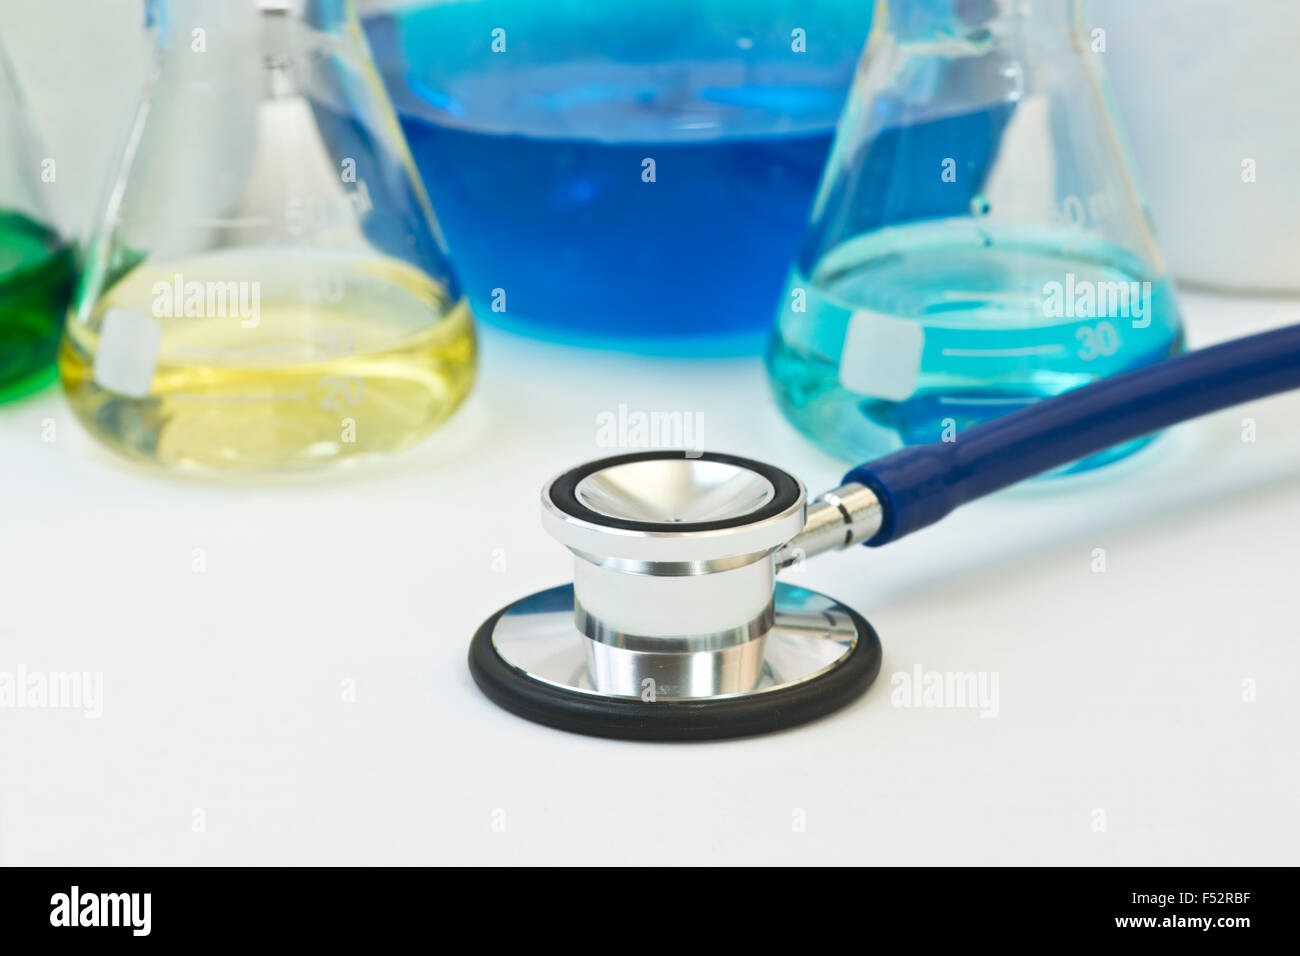 Stethoscope with medical research equipment in background. Stock Photo